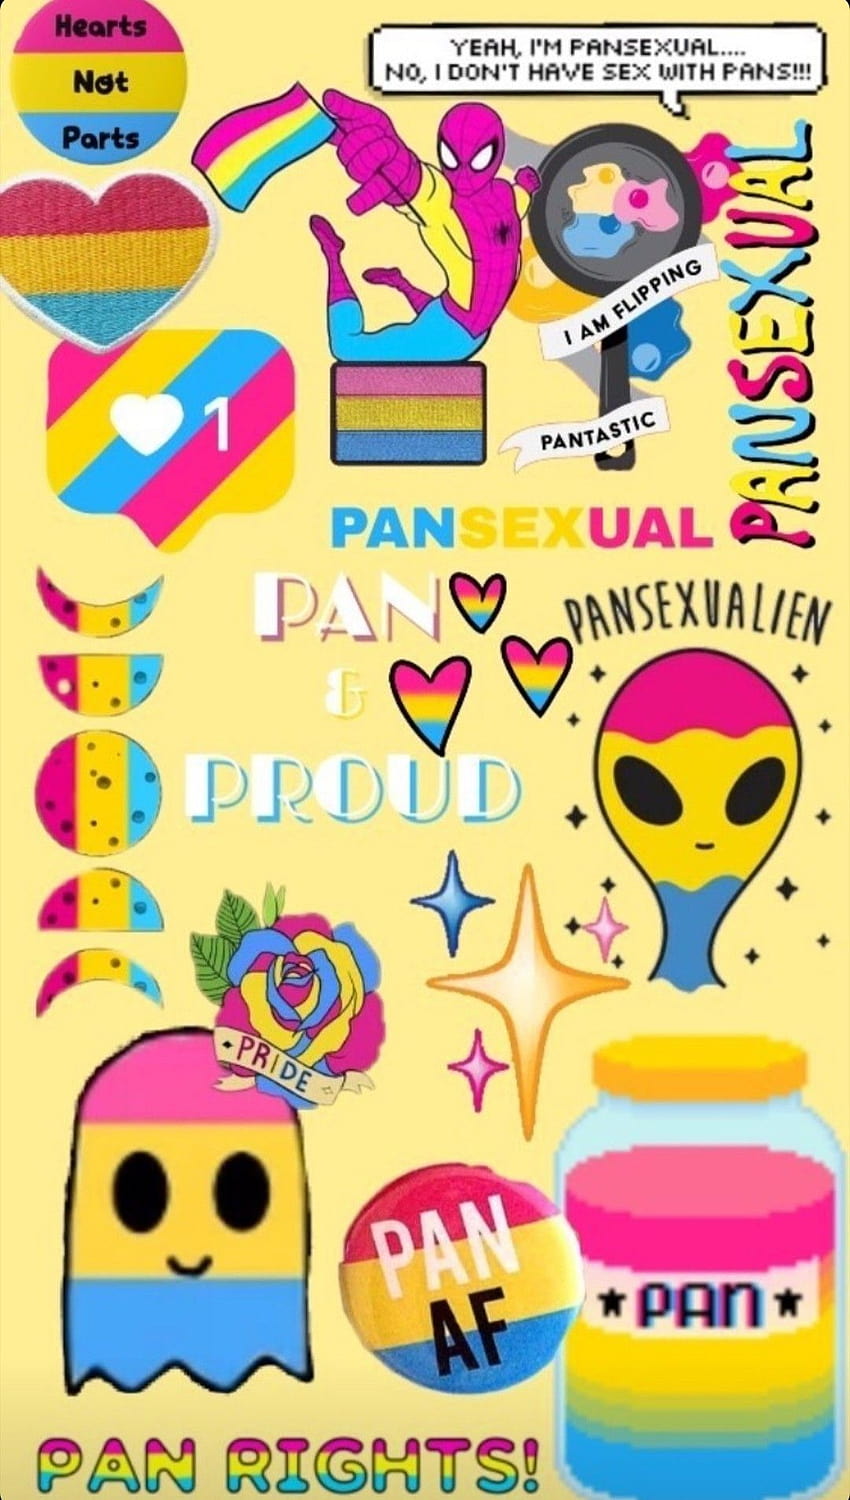 Pansexual pride wallpaper for phone or desktop! Let your pride shine - Pansexual